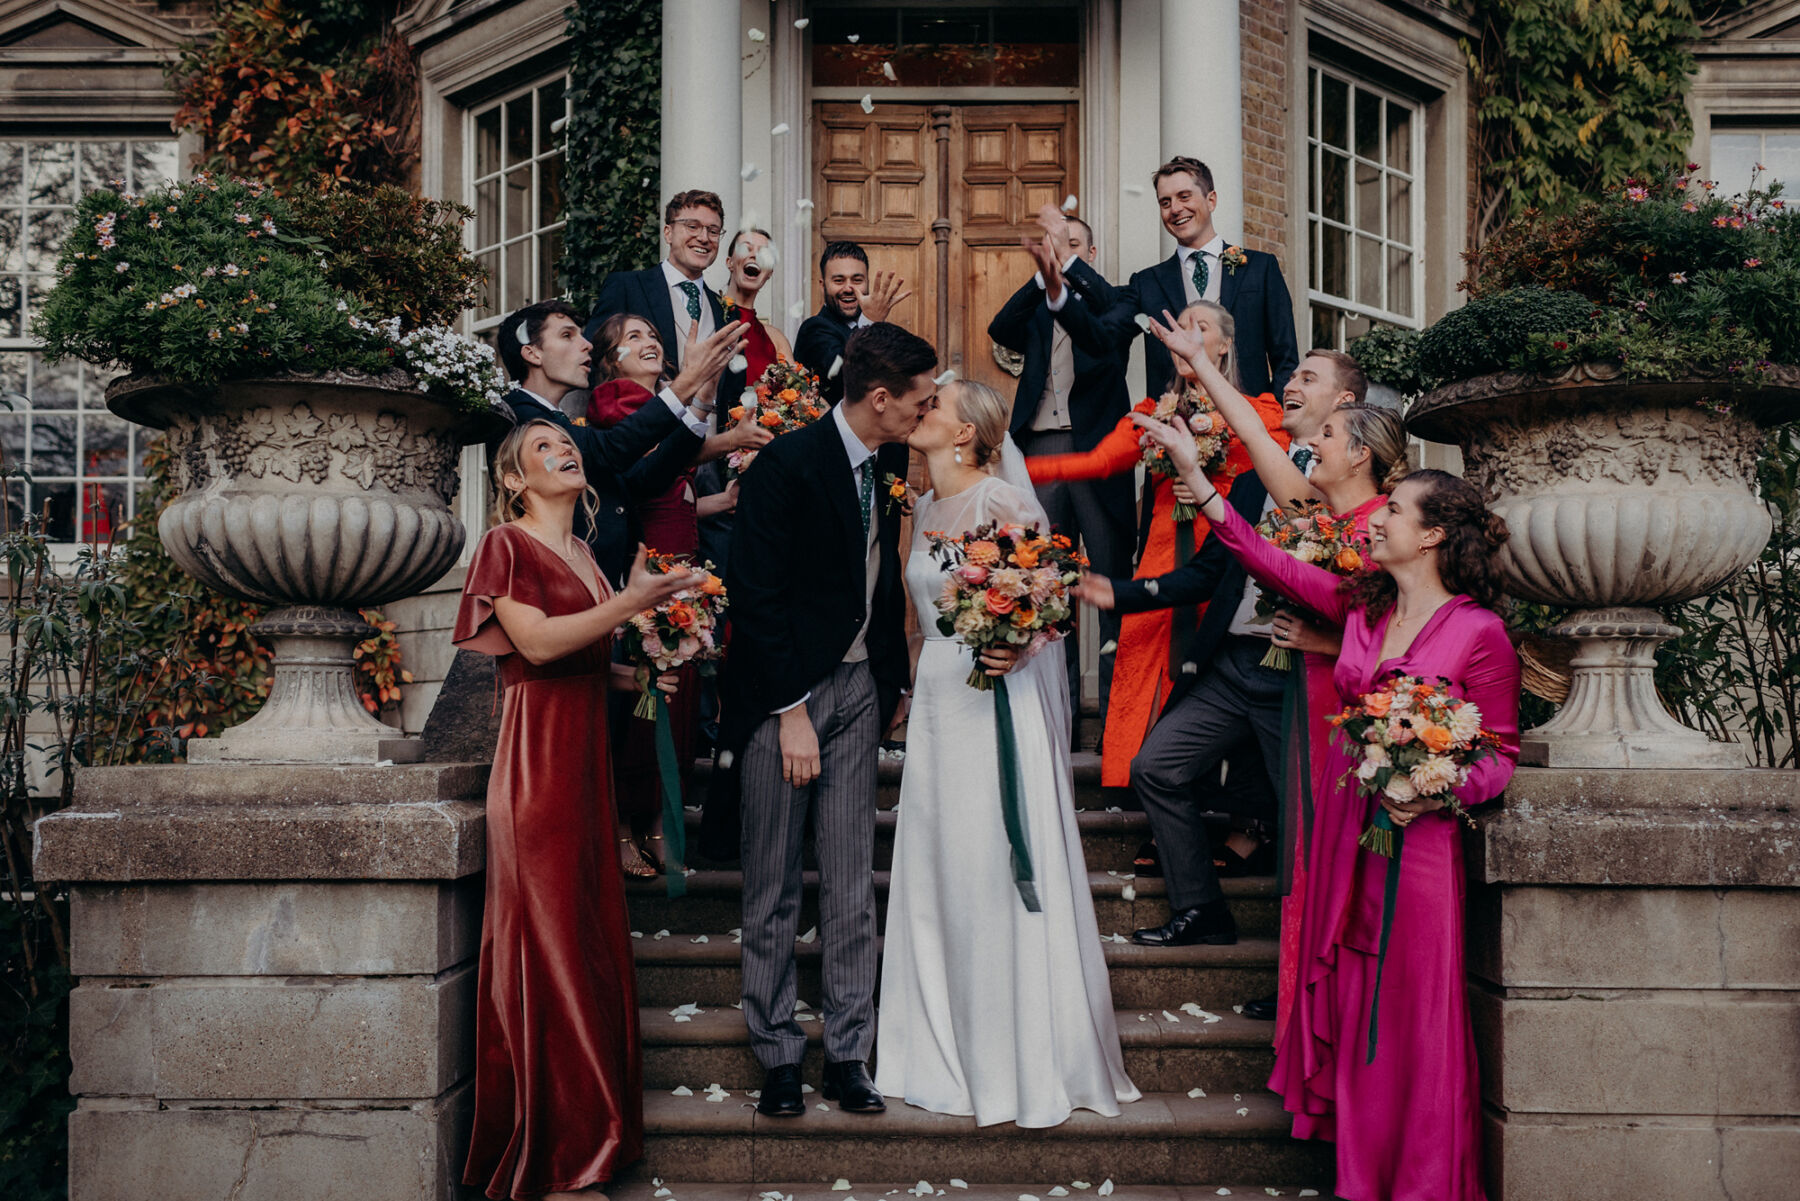 Bride and groom standing on the steps at Hampton Court Palace surrounded by the bridal party showering them in confetti. The bridesmaids wear bright pink and red dresses. Victoria Somerset-How Photography.